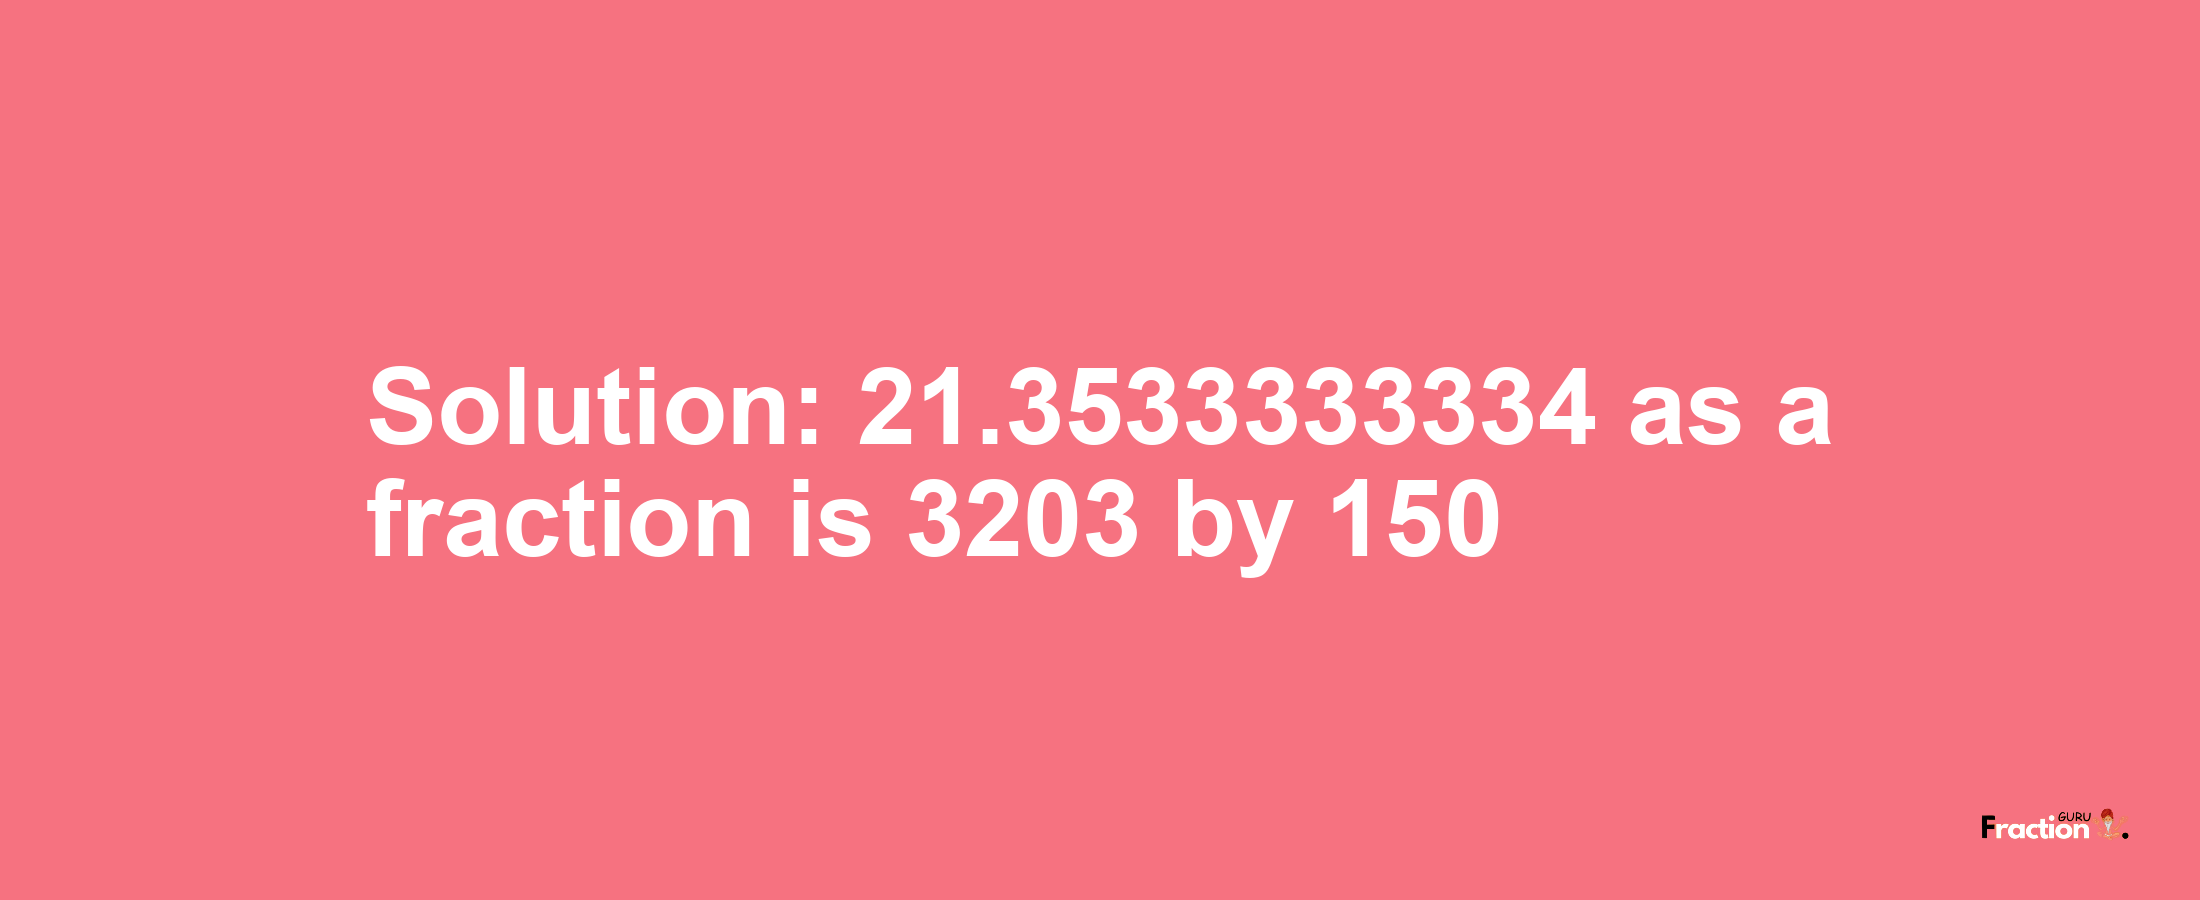 Solution:21.3533333334 as a fraction is 3203/150